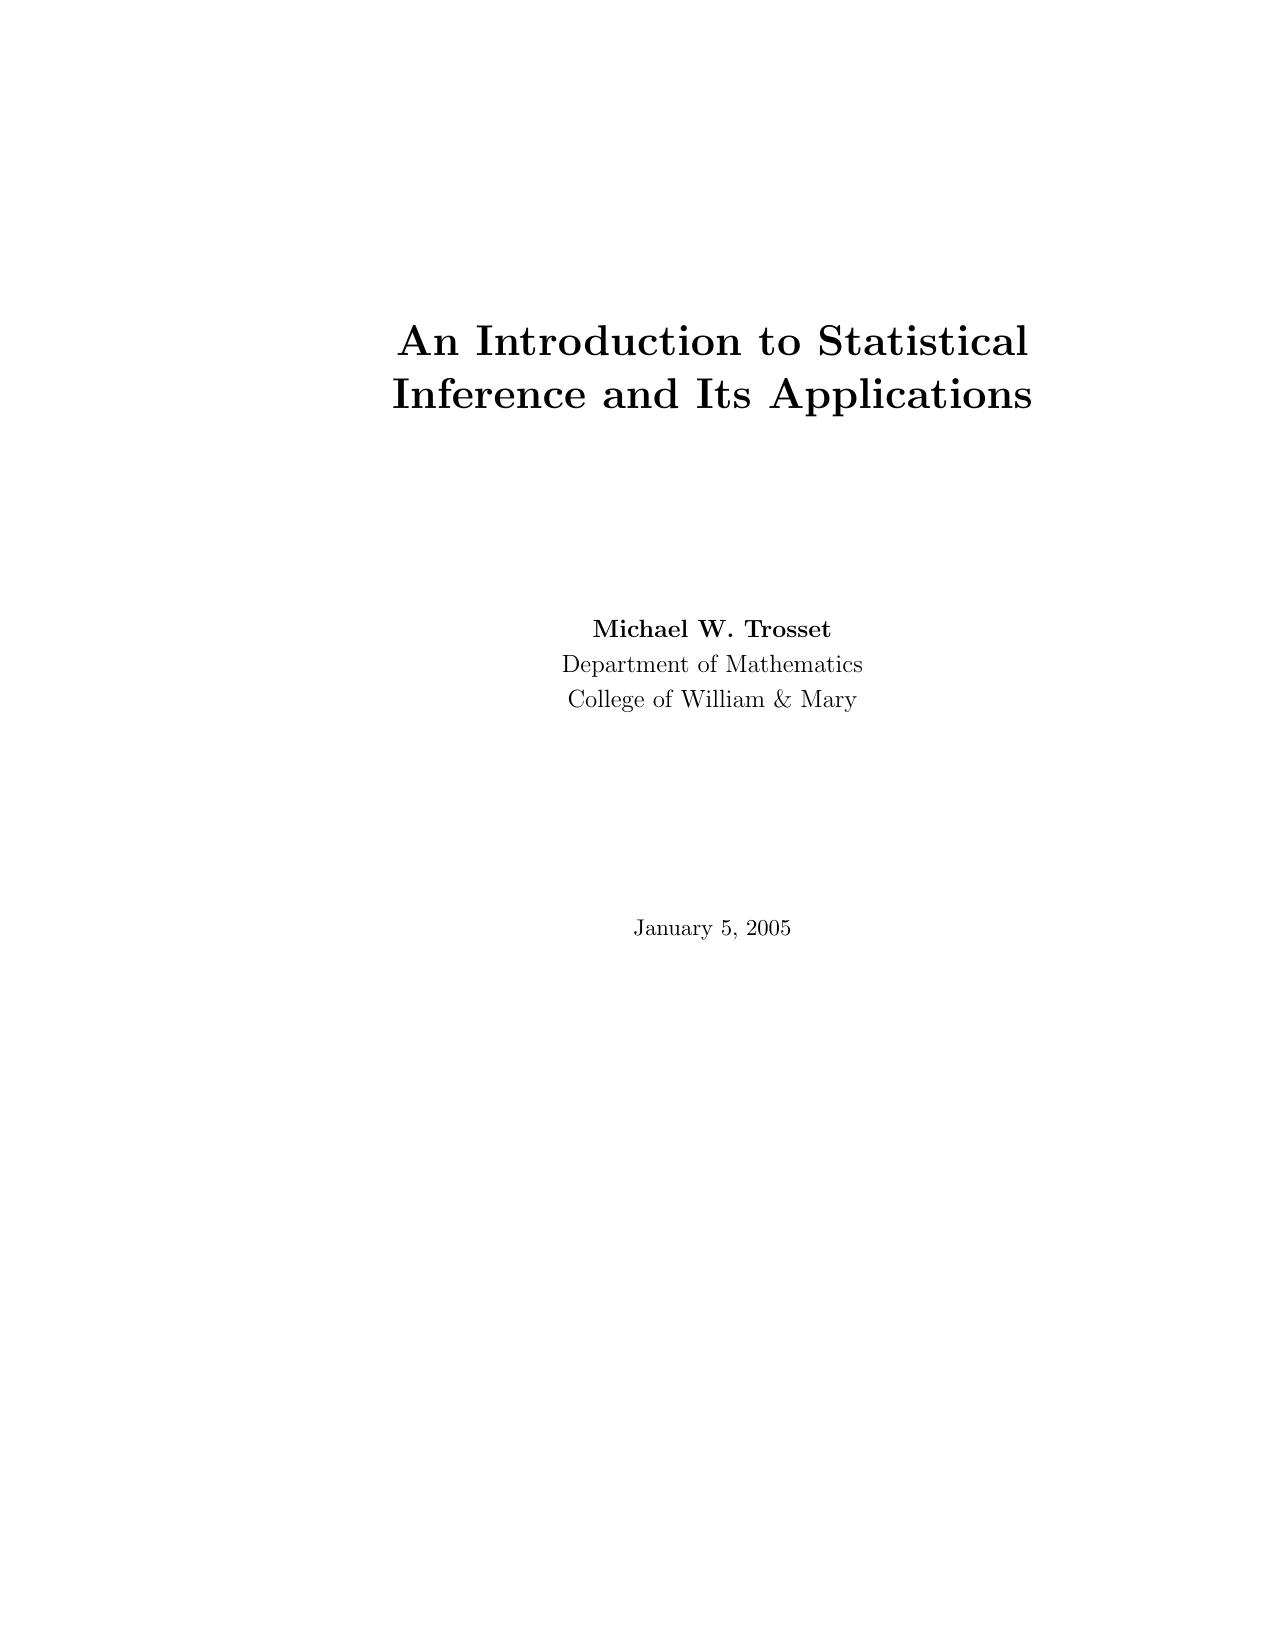 An Introduction to Statistical Inference and Its Applications